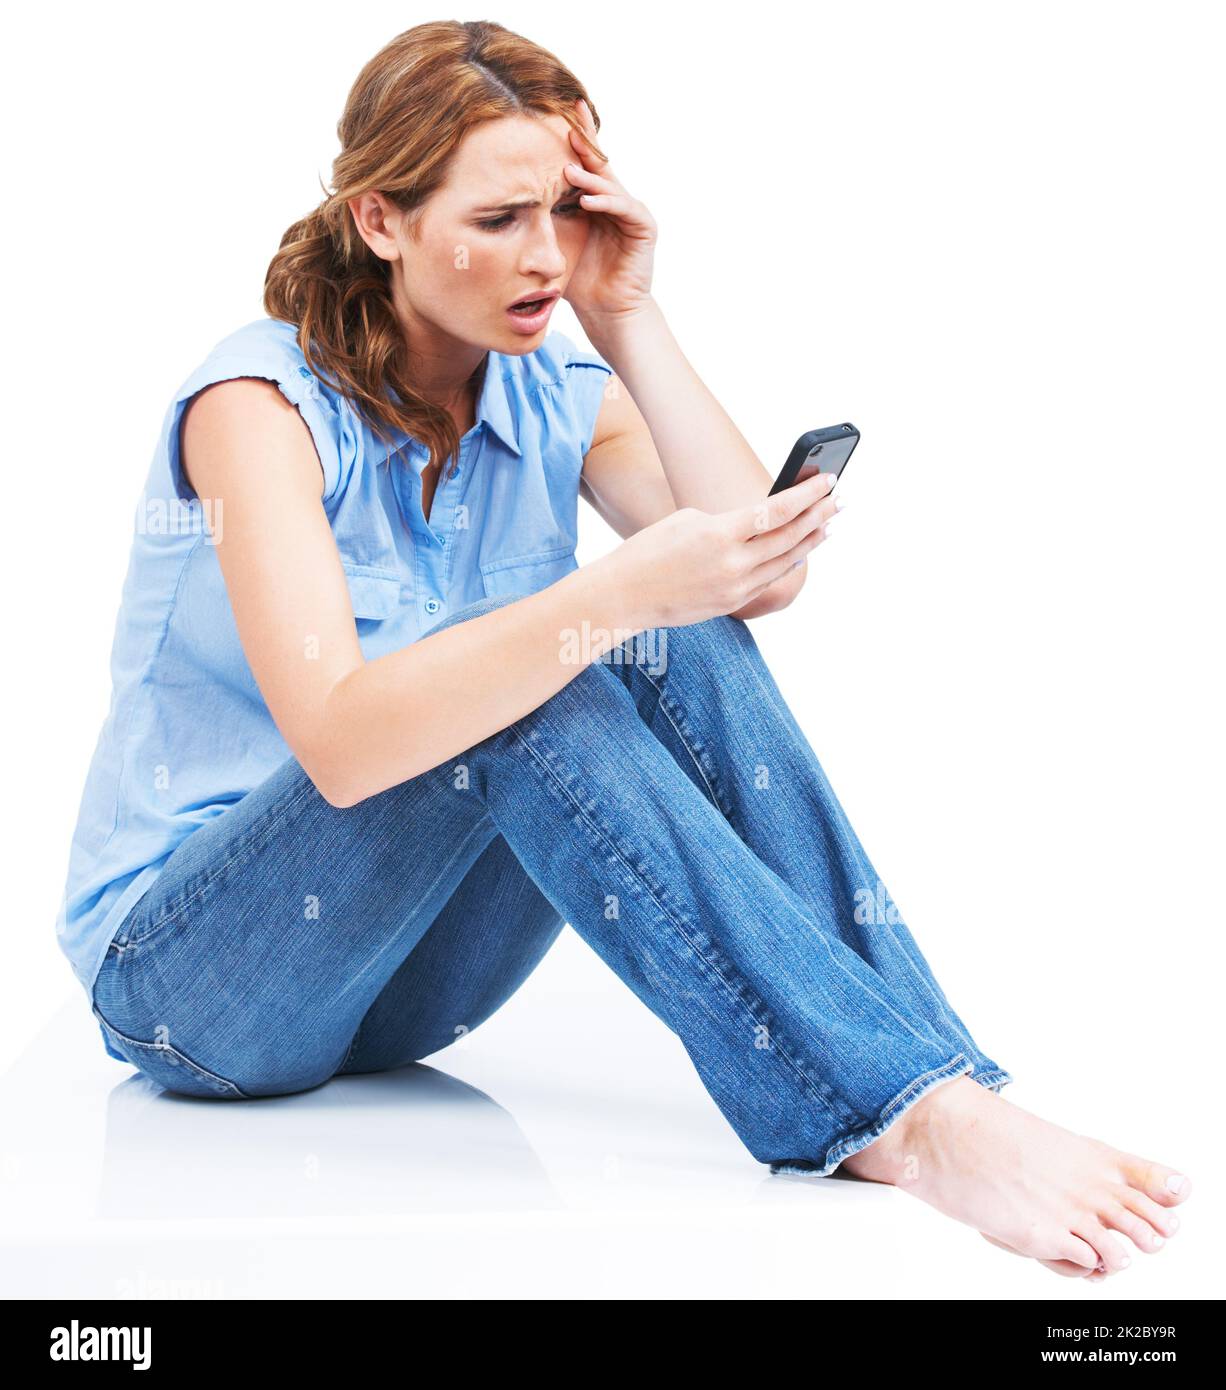 Breakups are hard to take - Relationships. Beautiful young woman reading a text message in disbelief. Stock Photo